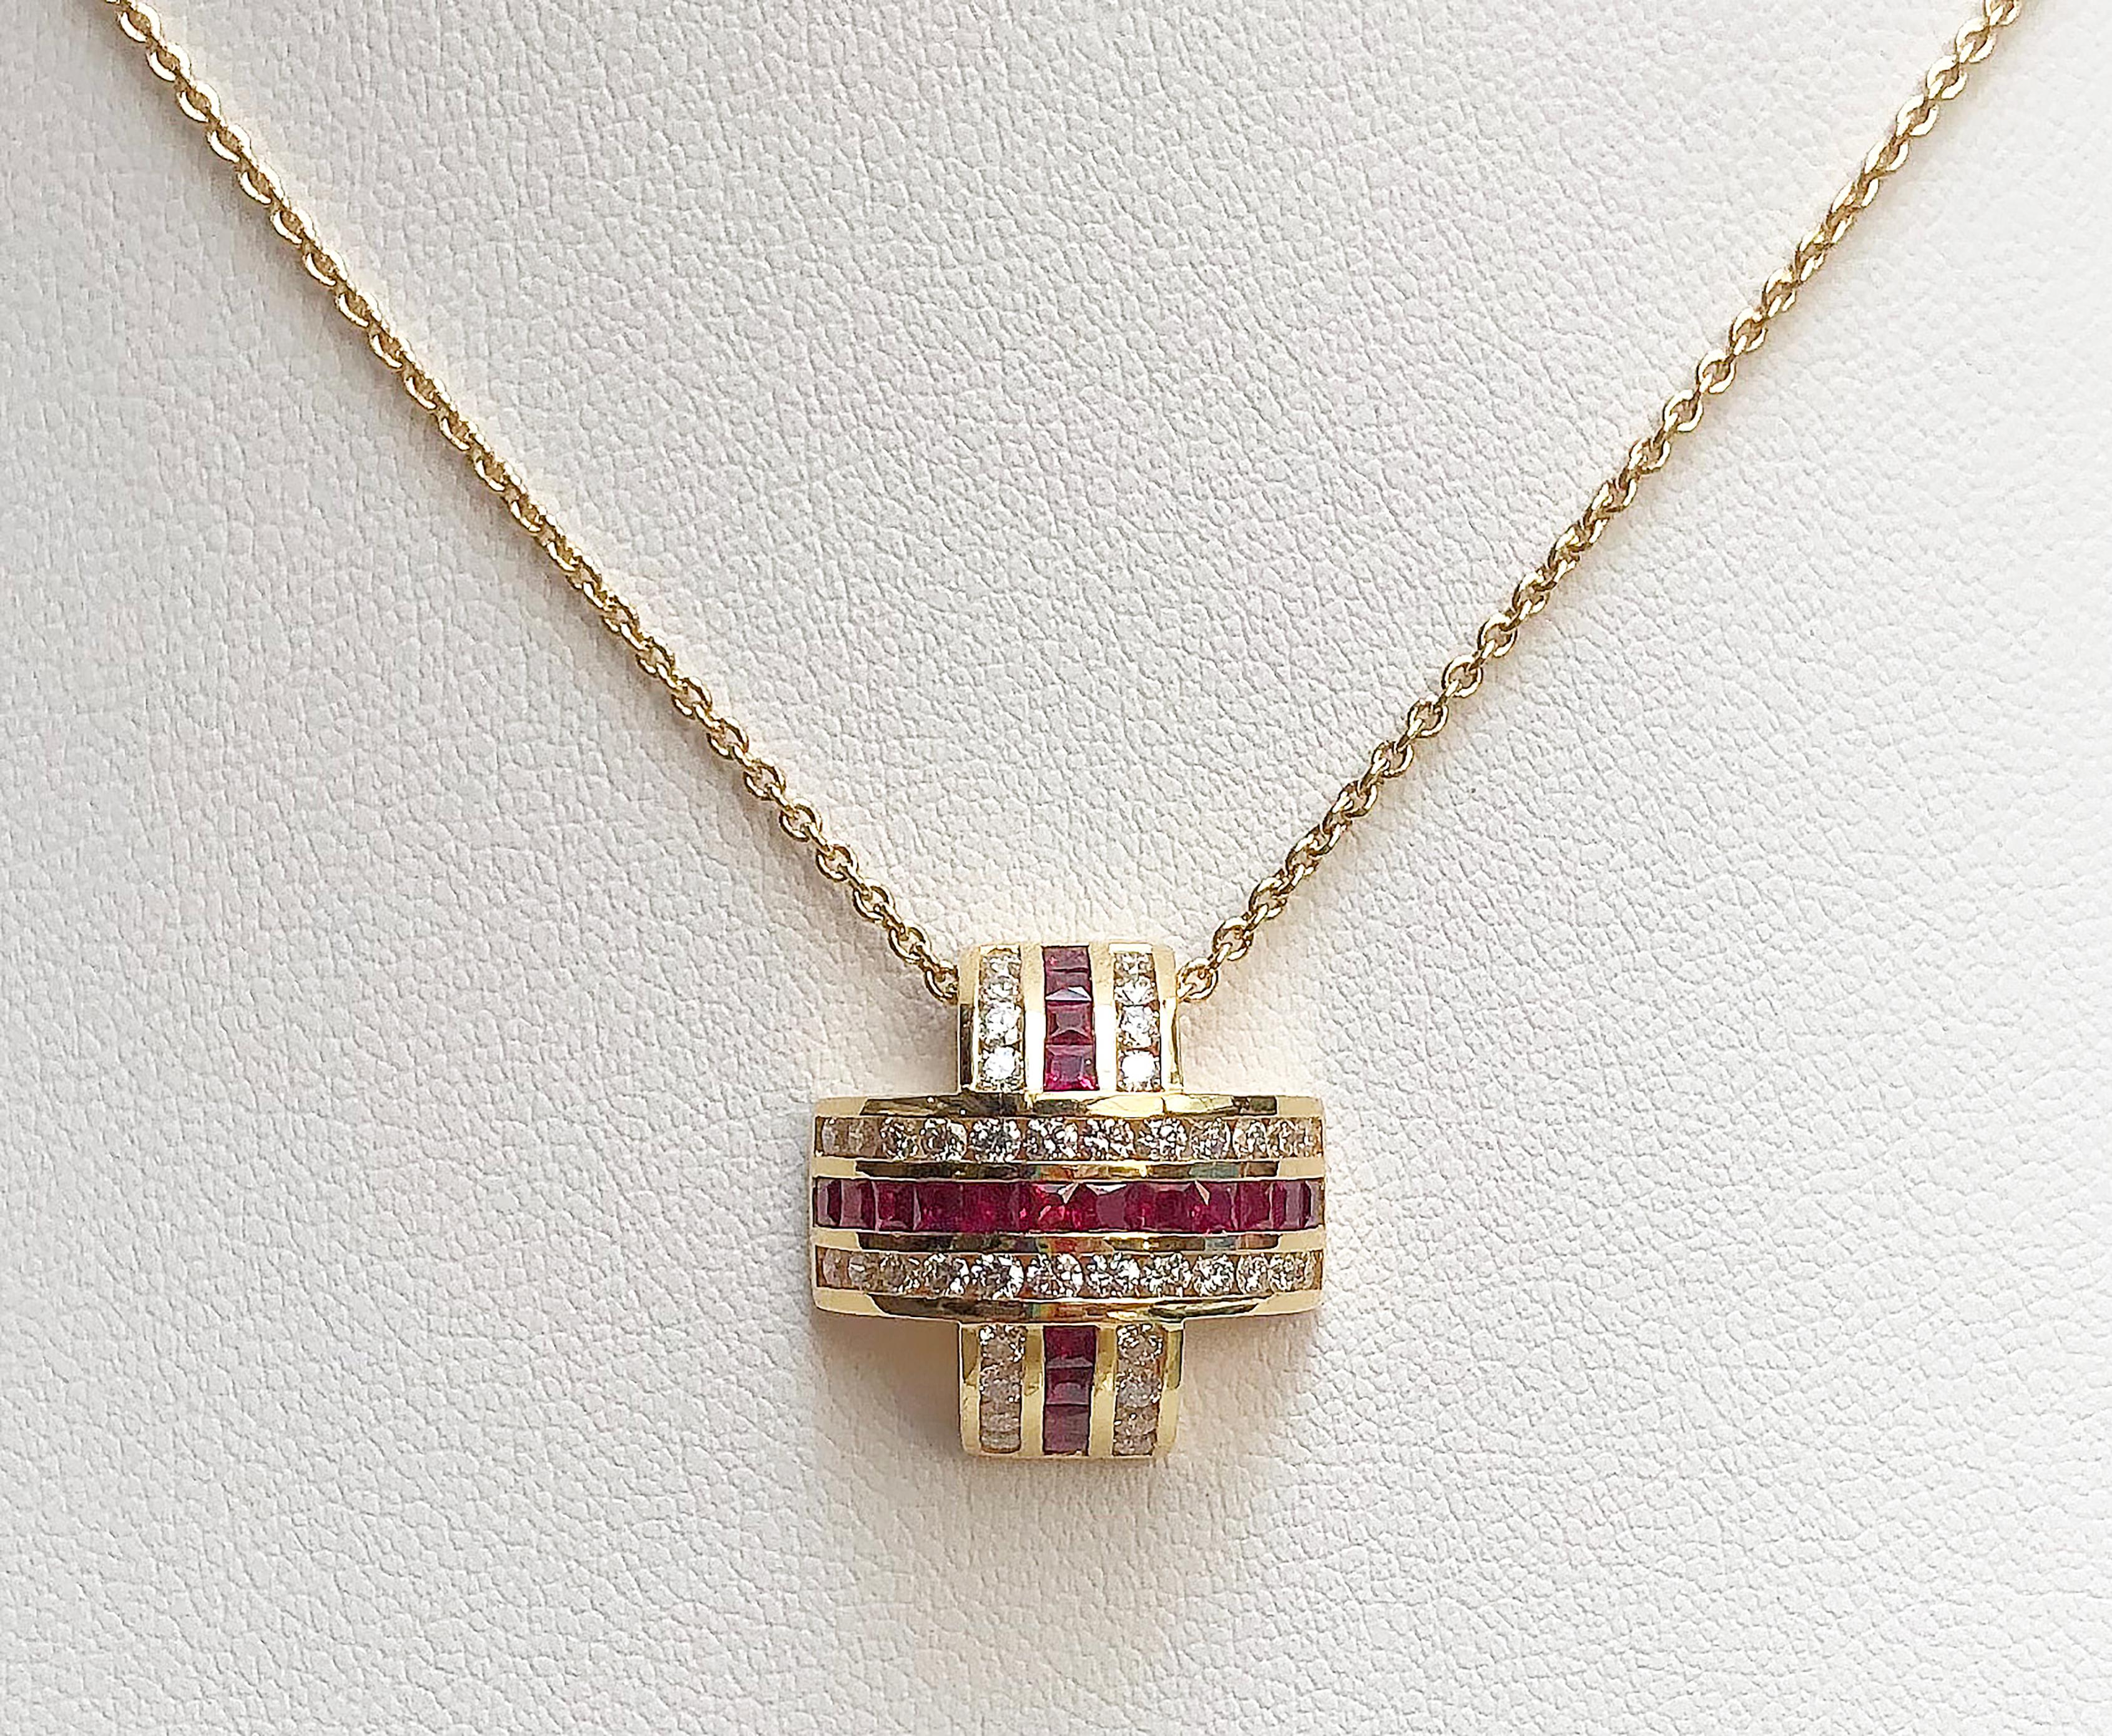 Ruby 1.17 carats with Diamond 0.82 carat Pendant set in 18 Karat Gold Settings
(chain not included)

Width:  2.0 cm 
Length: 2.0 cm
Total Weight: 5.36 grams

